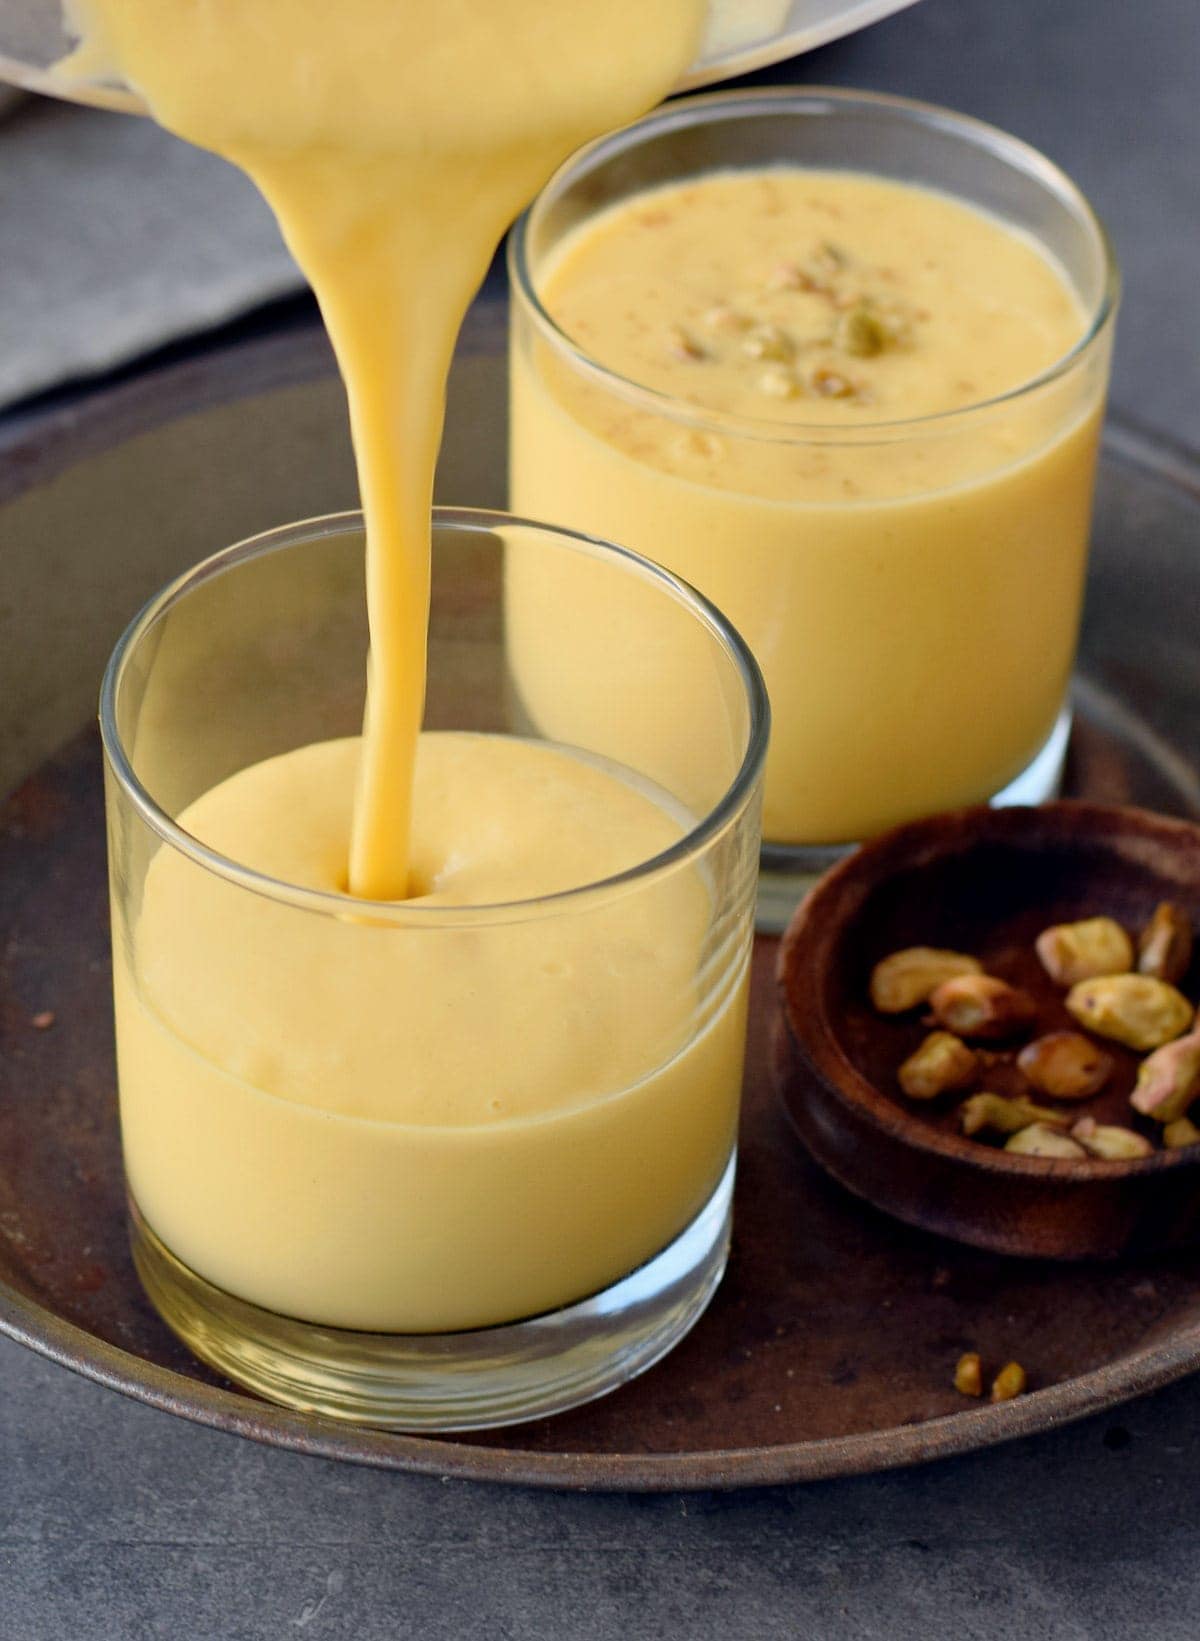 mango lassi is being poured in a glass